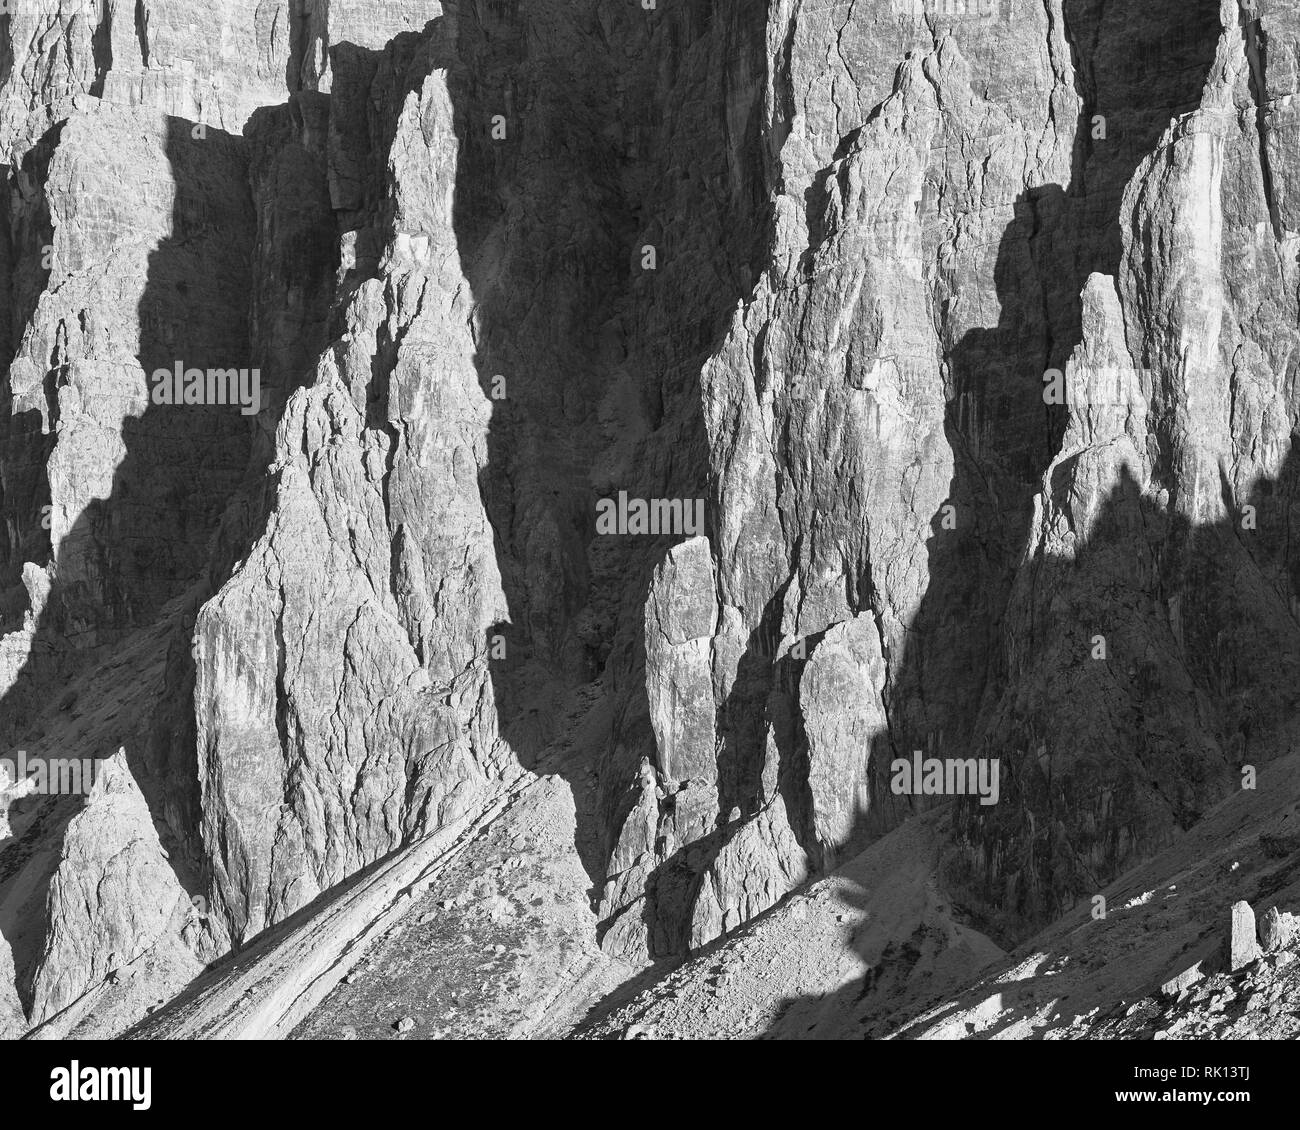 Dolomite cliffs in black and white, from Passo Giau, Veneto, Italy Stock Photo